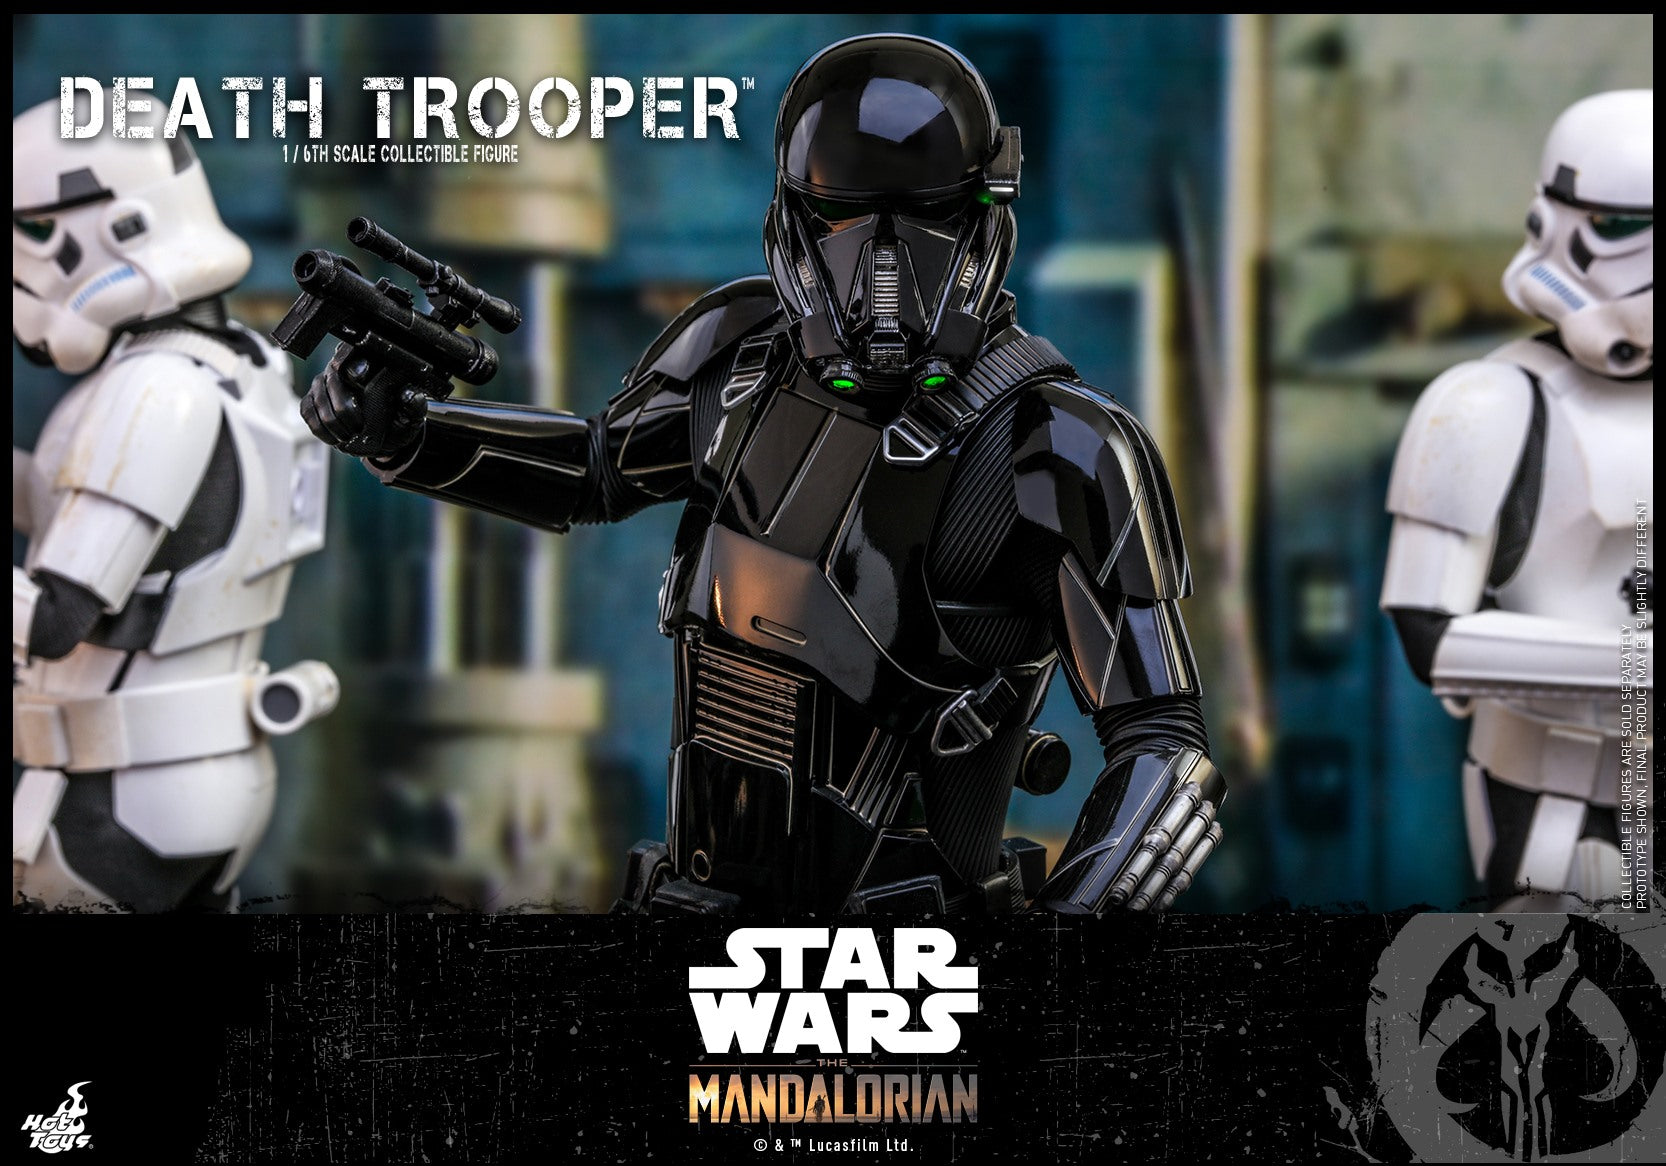 Hot Toys - TMS013 - Star Wars: The Mandalorian - Death Trooper